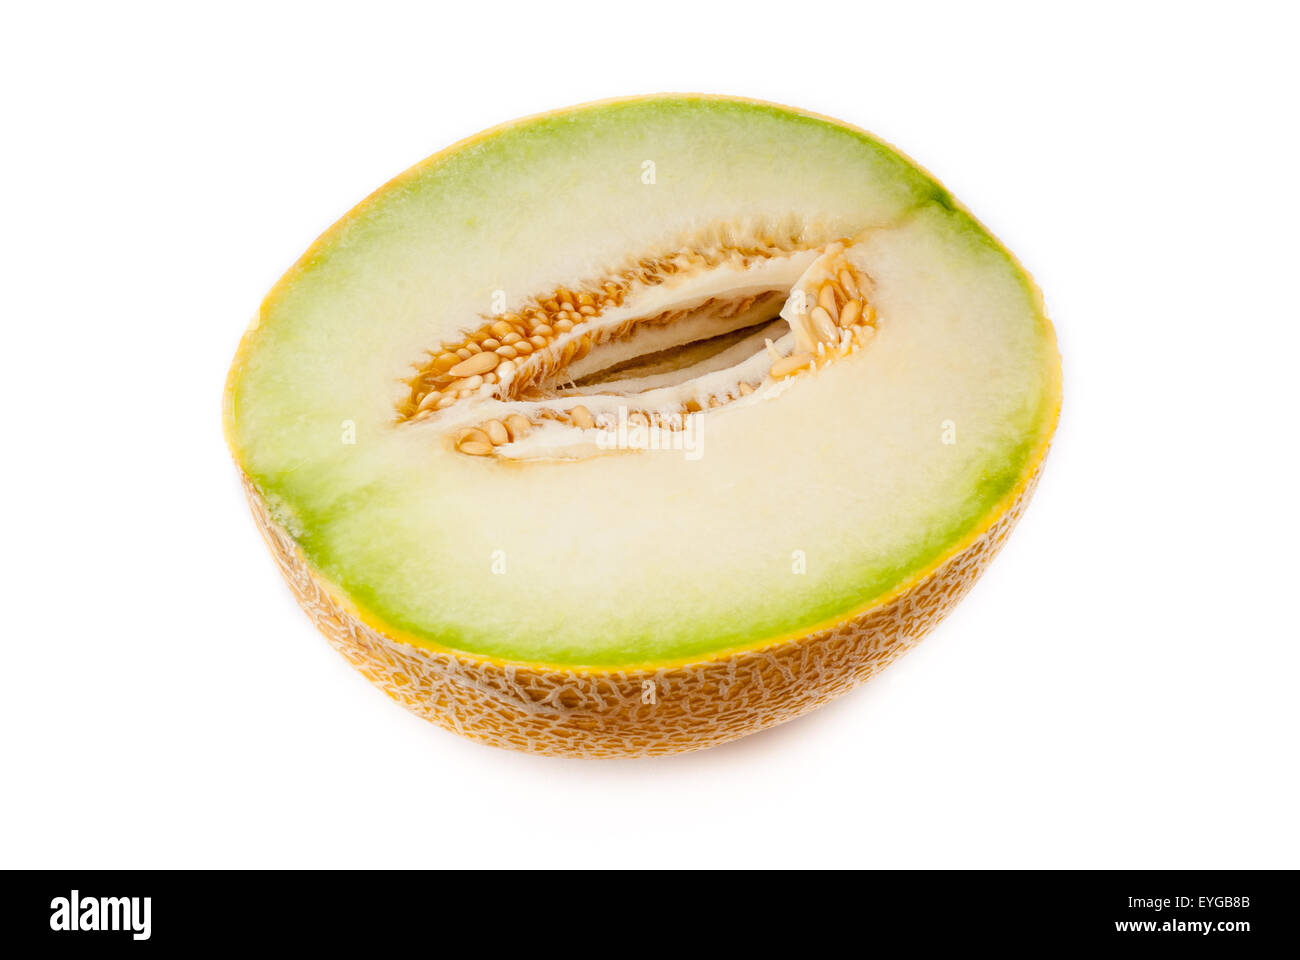 melon cut in half on white background Stock Photo